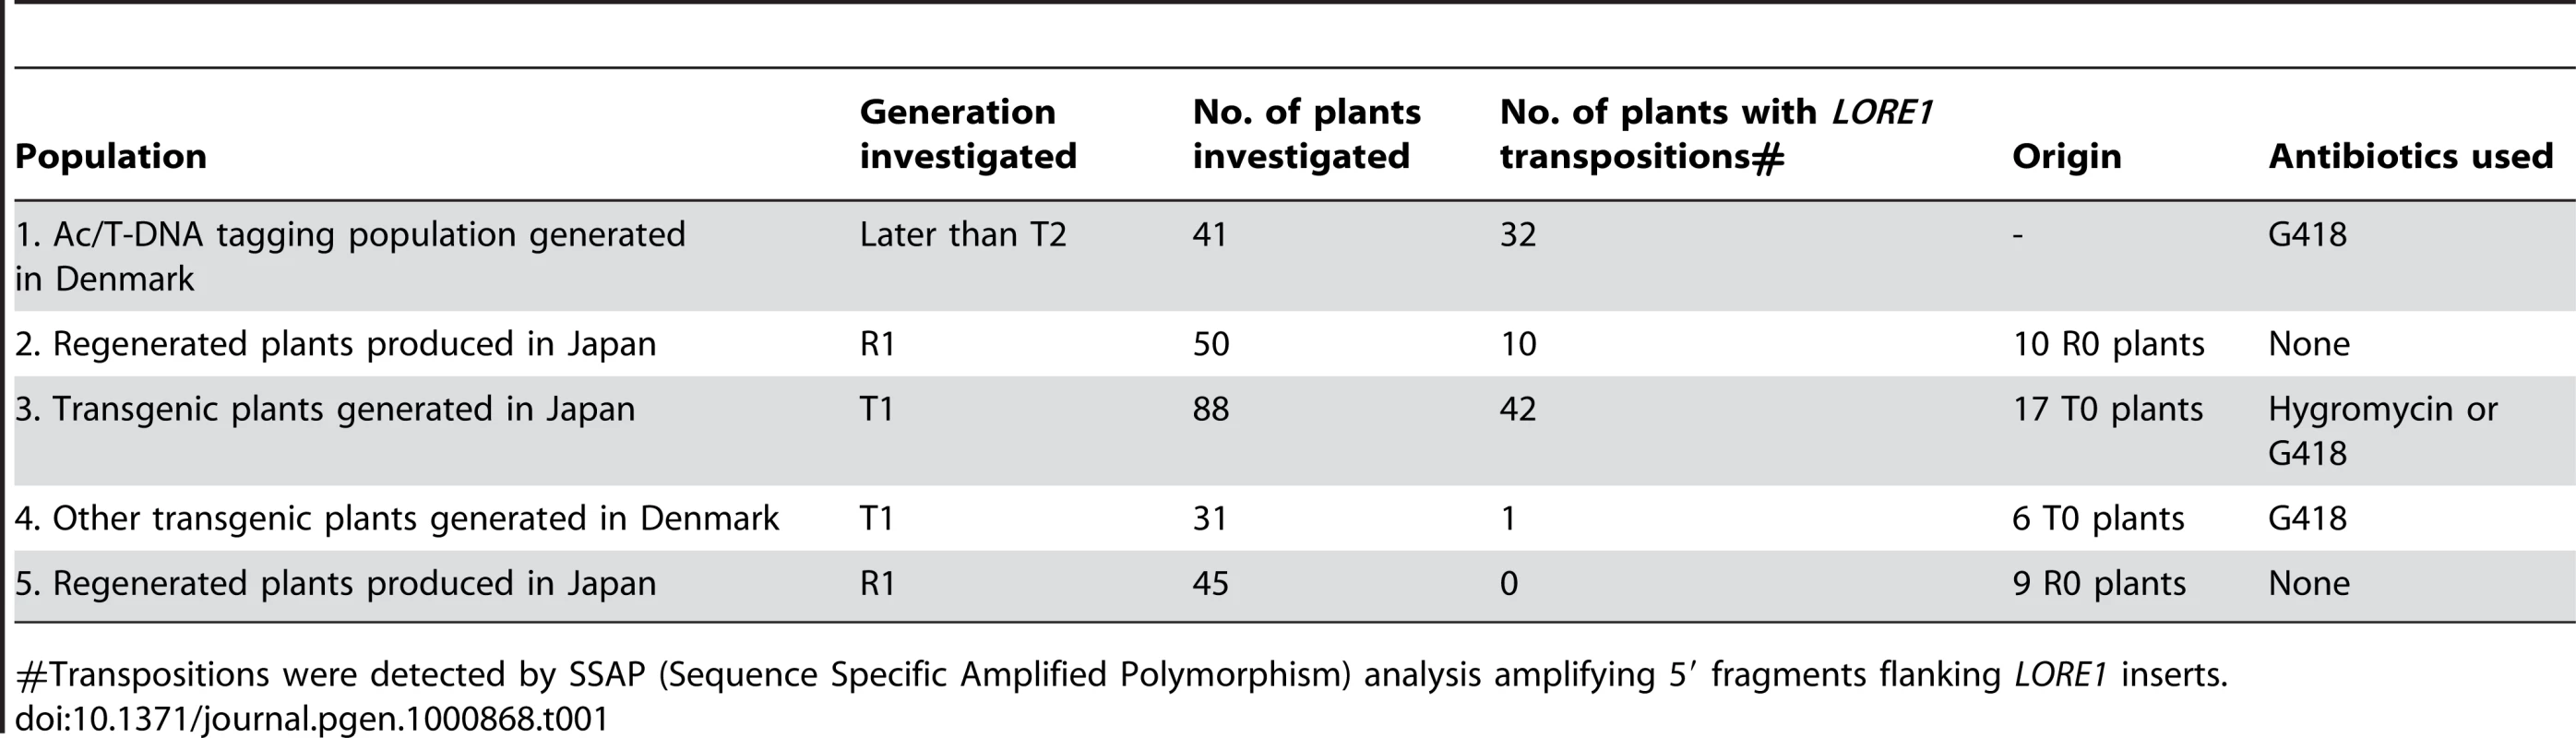 <i>LORE1</i> transpositions in regenerated plant populations.